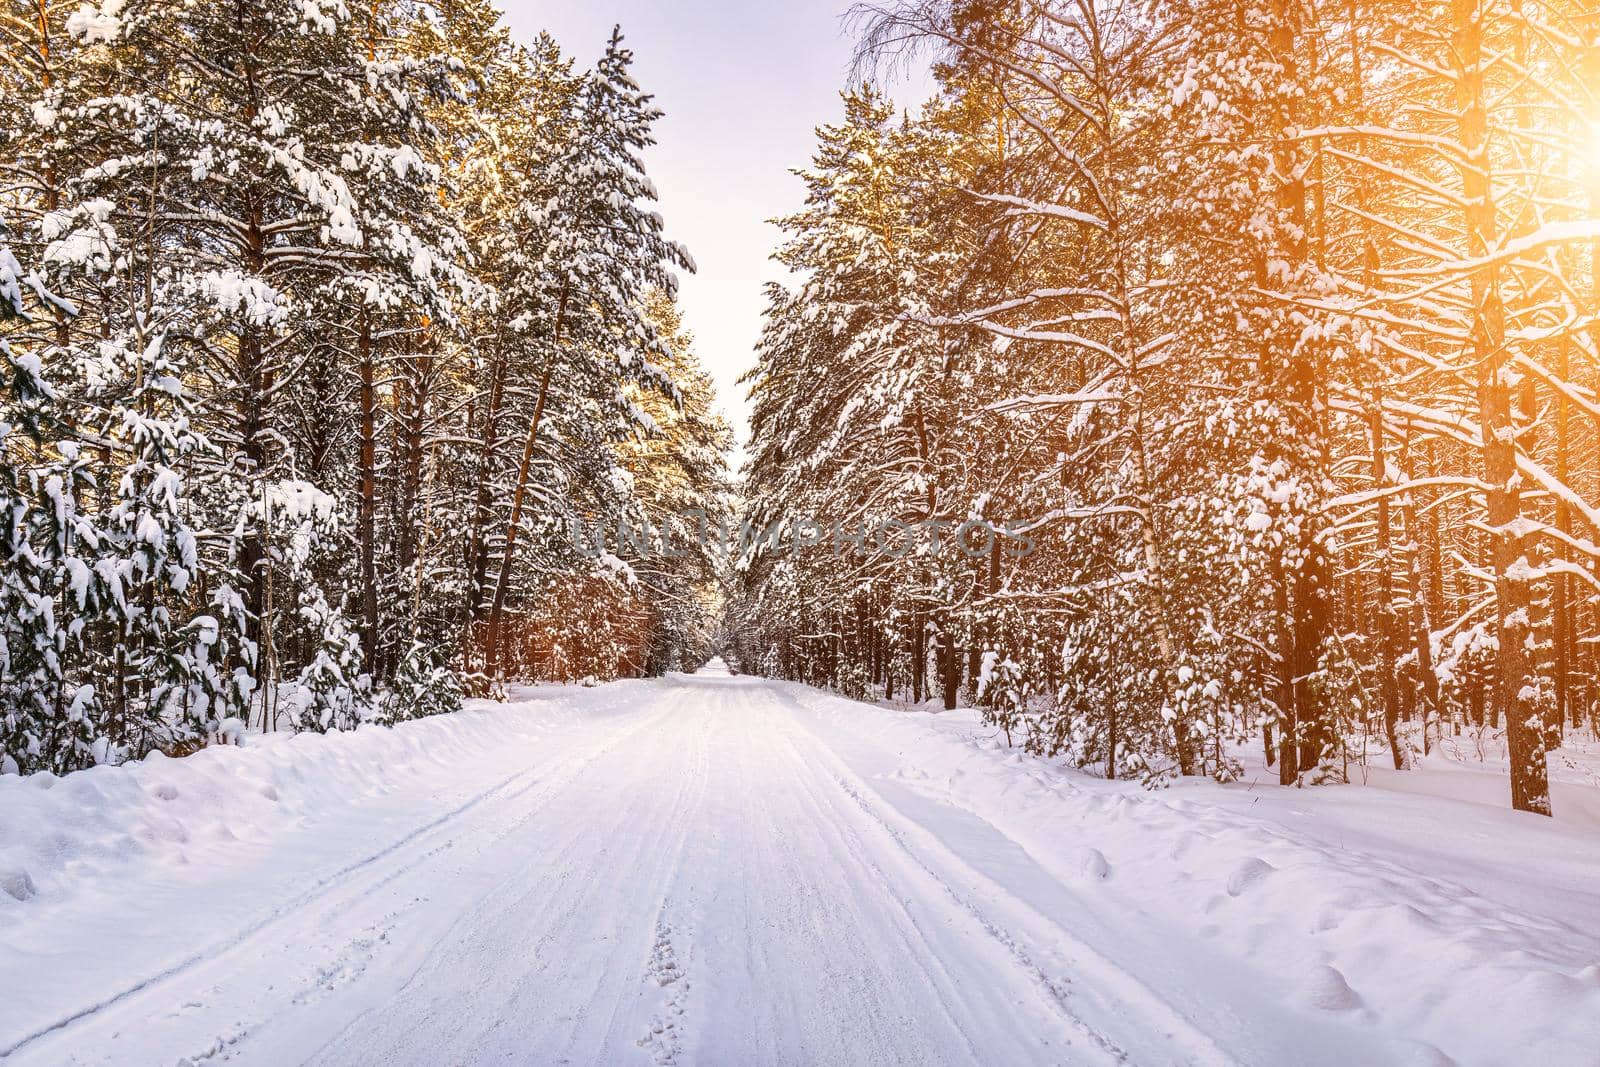 Automobile road through a pine winter forest covered with snow on a clear sunny day. Pines along the edges of the road and the rays of the sun shining through them.